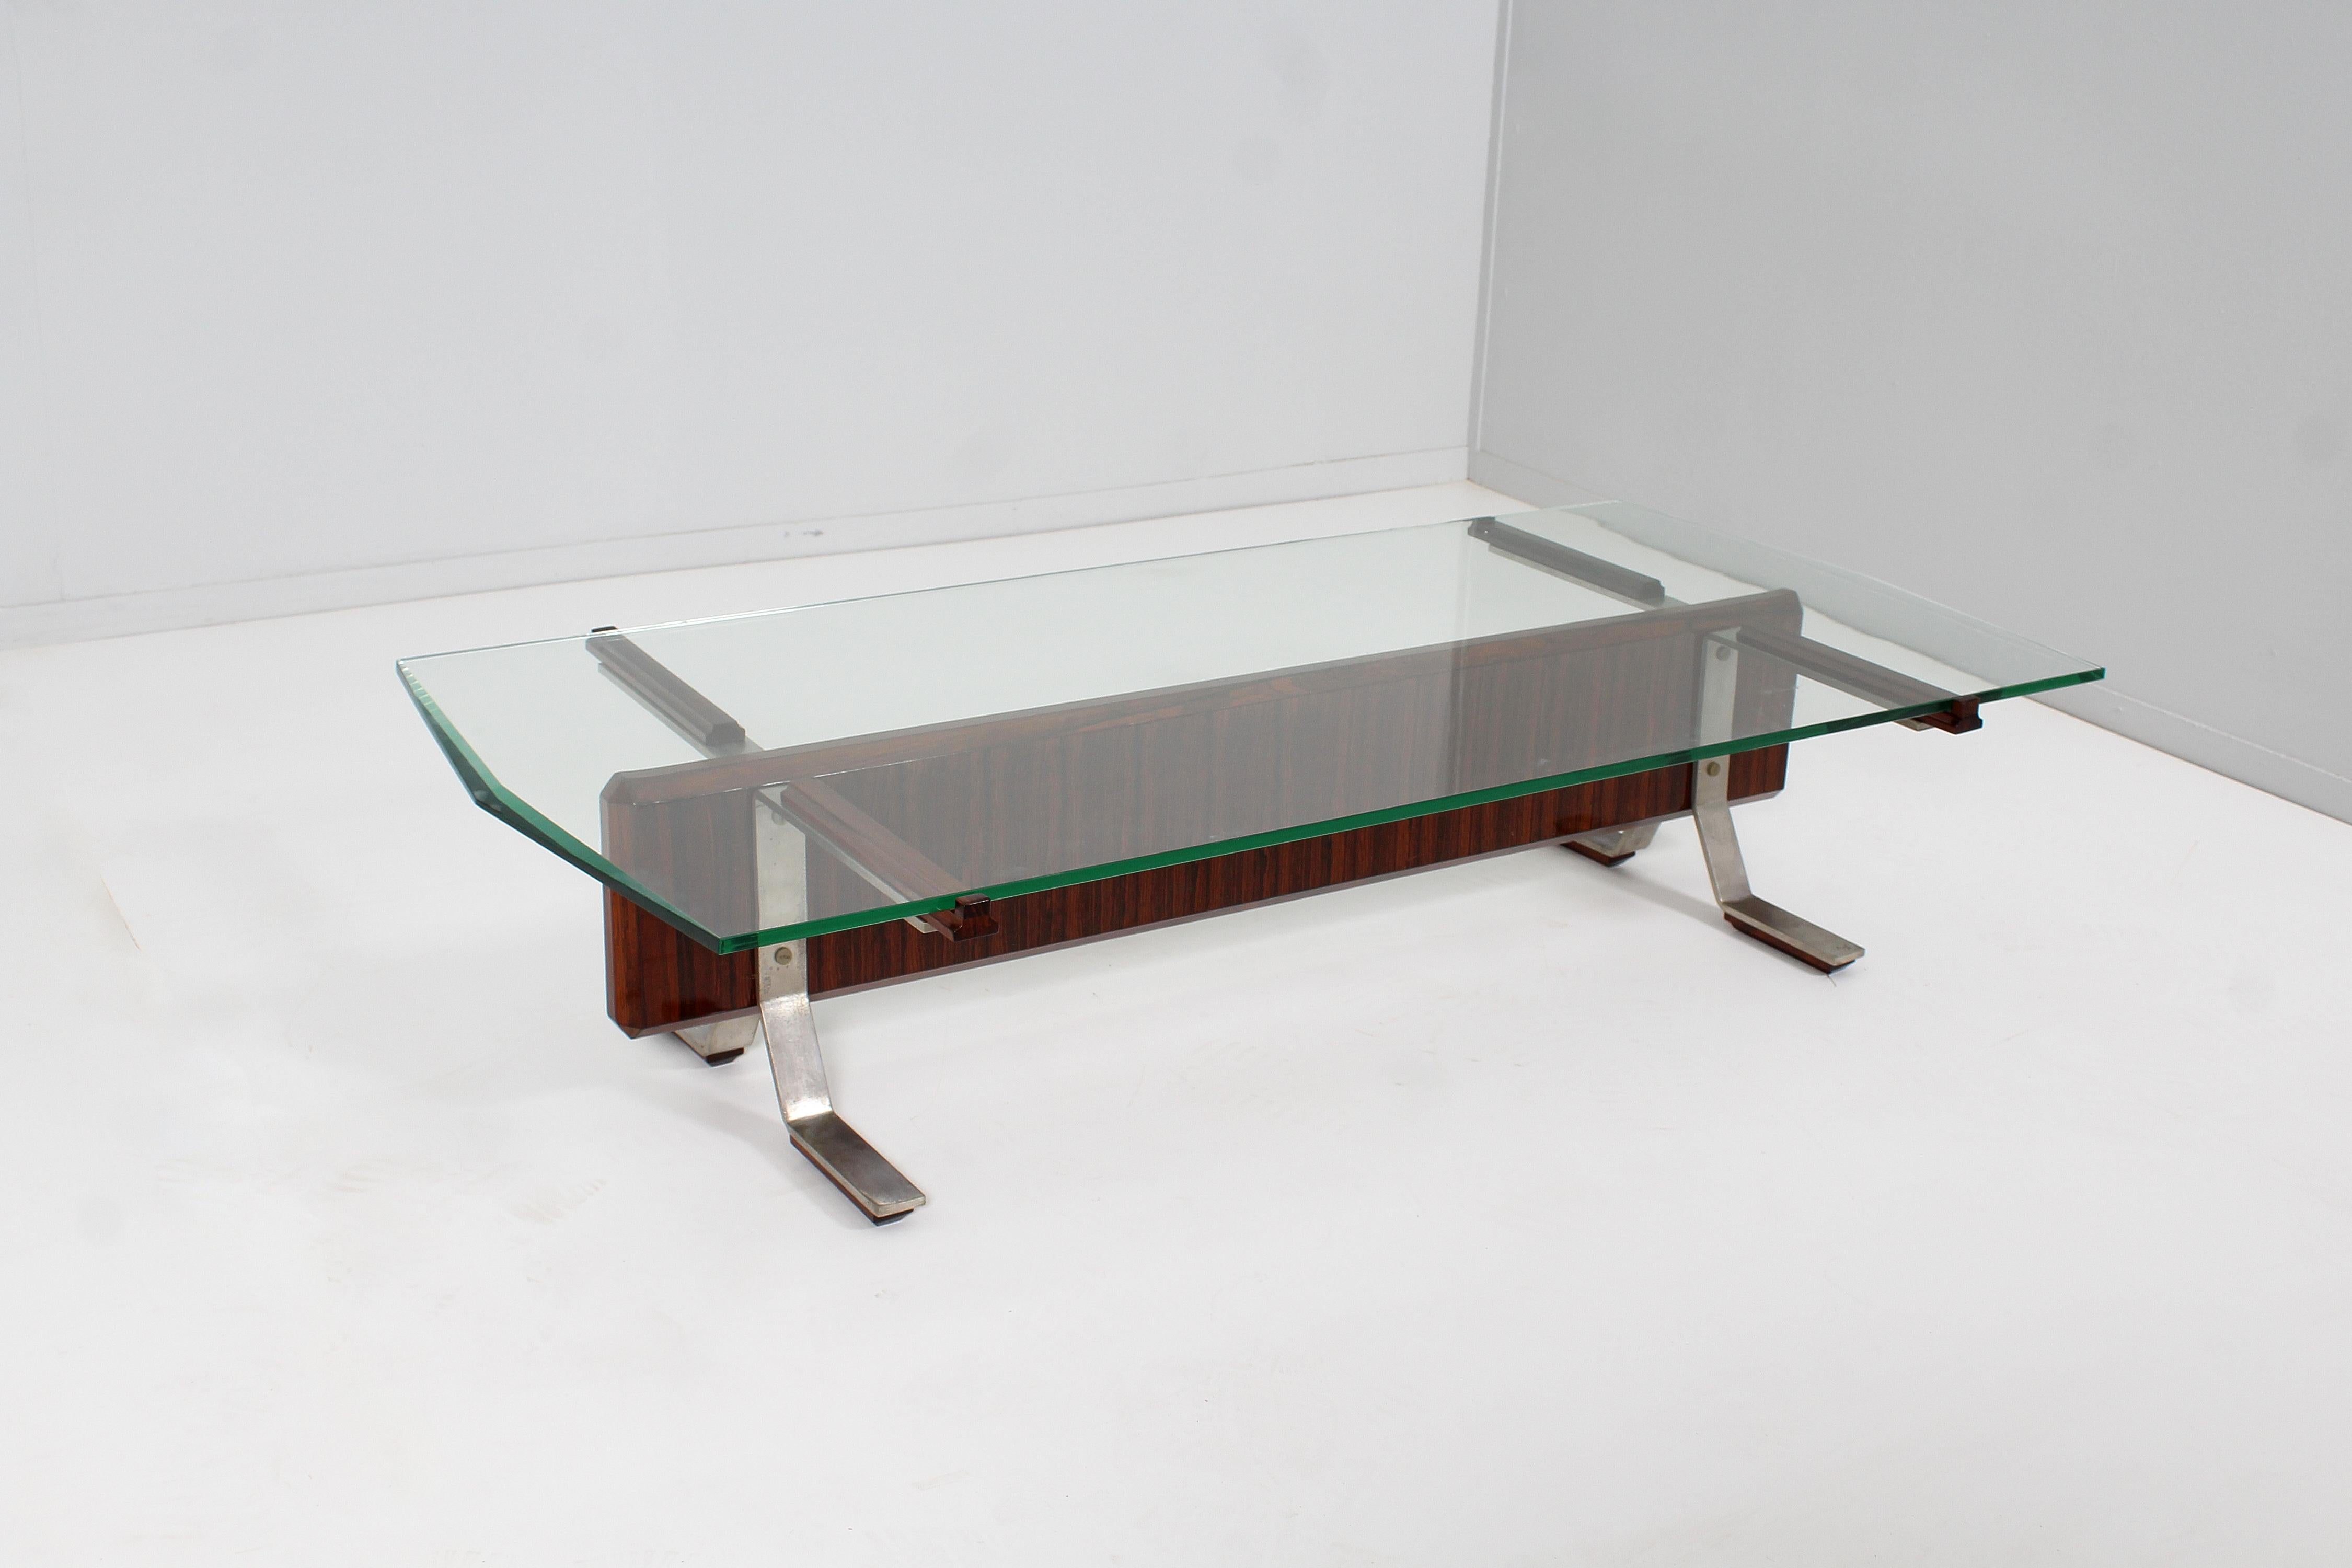 Mid-Century Modern Original MIM Roma I. Parisi (attr.) Glass, Metal and Wood Coffee Table 60s Italy For Sale